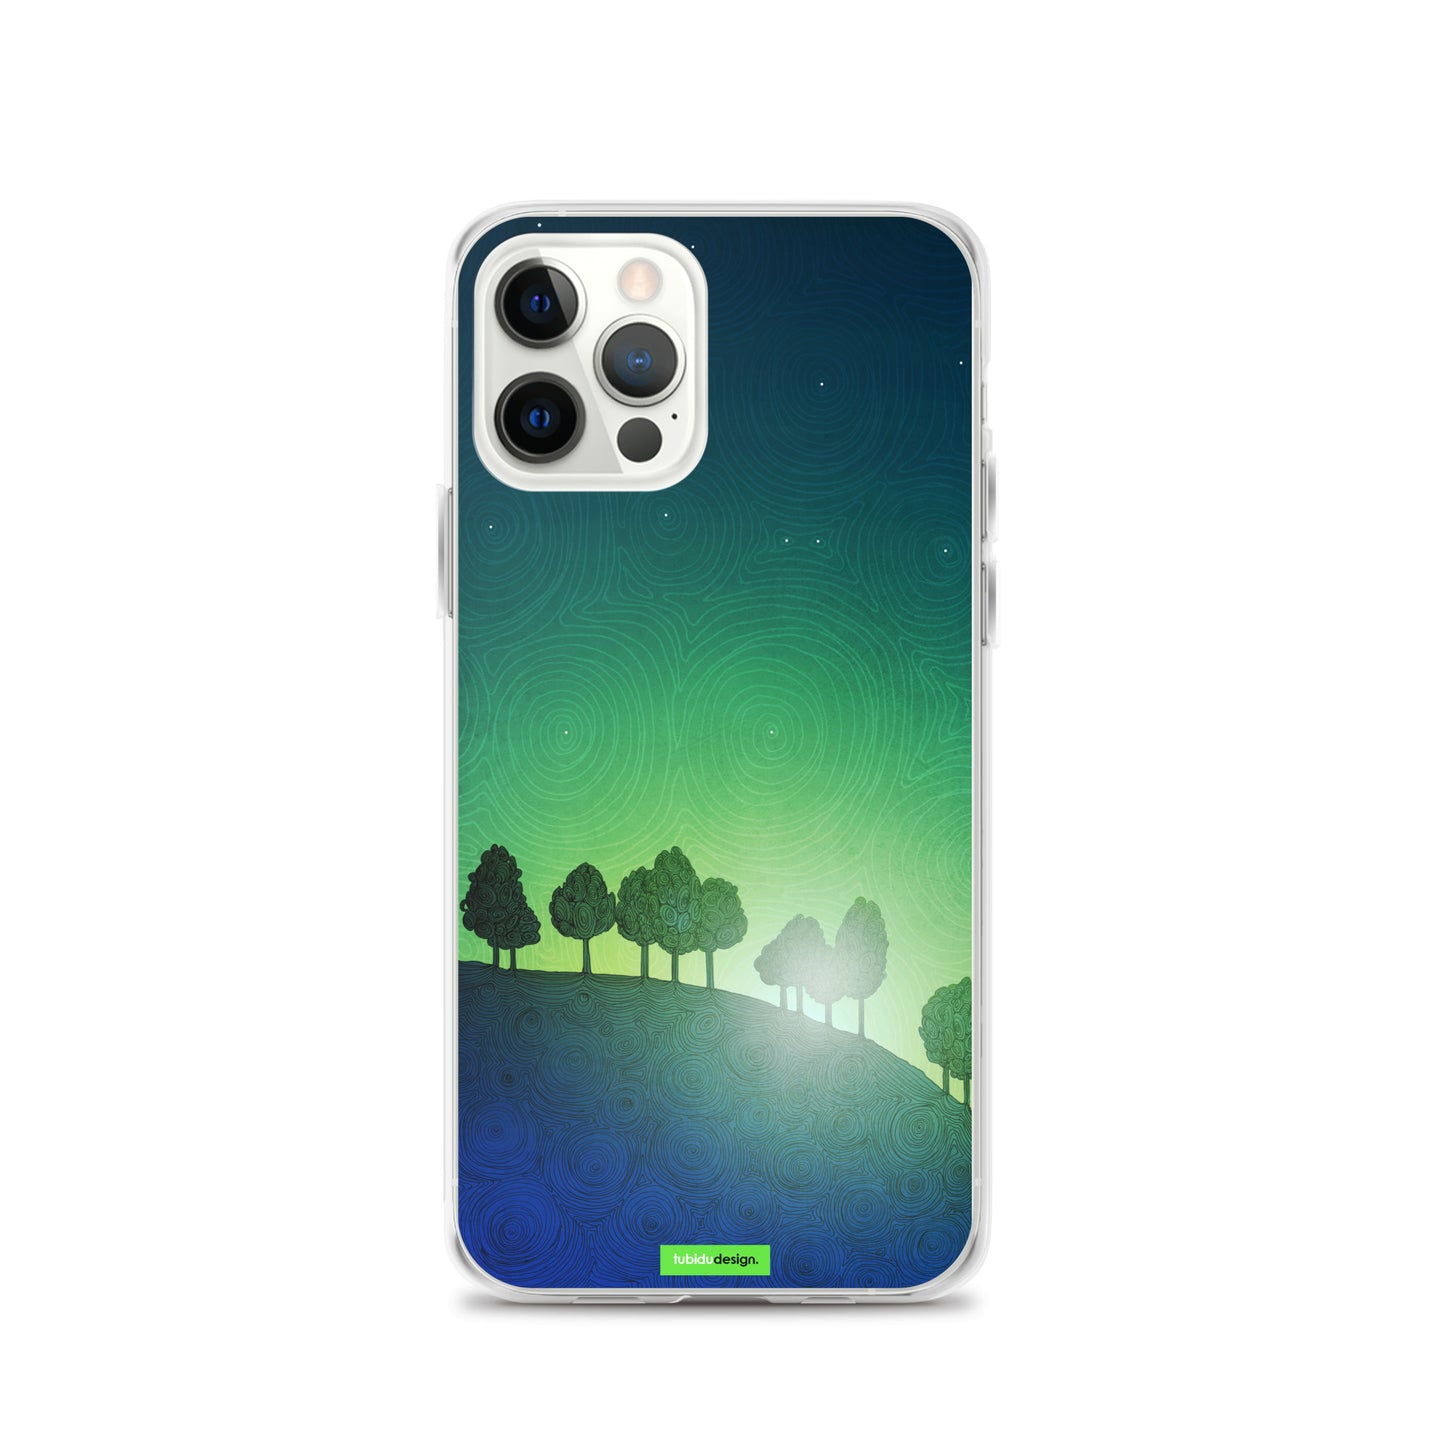 First streak of dawn (green) - Illustrated iPhone Case